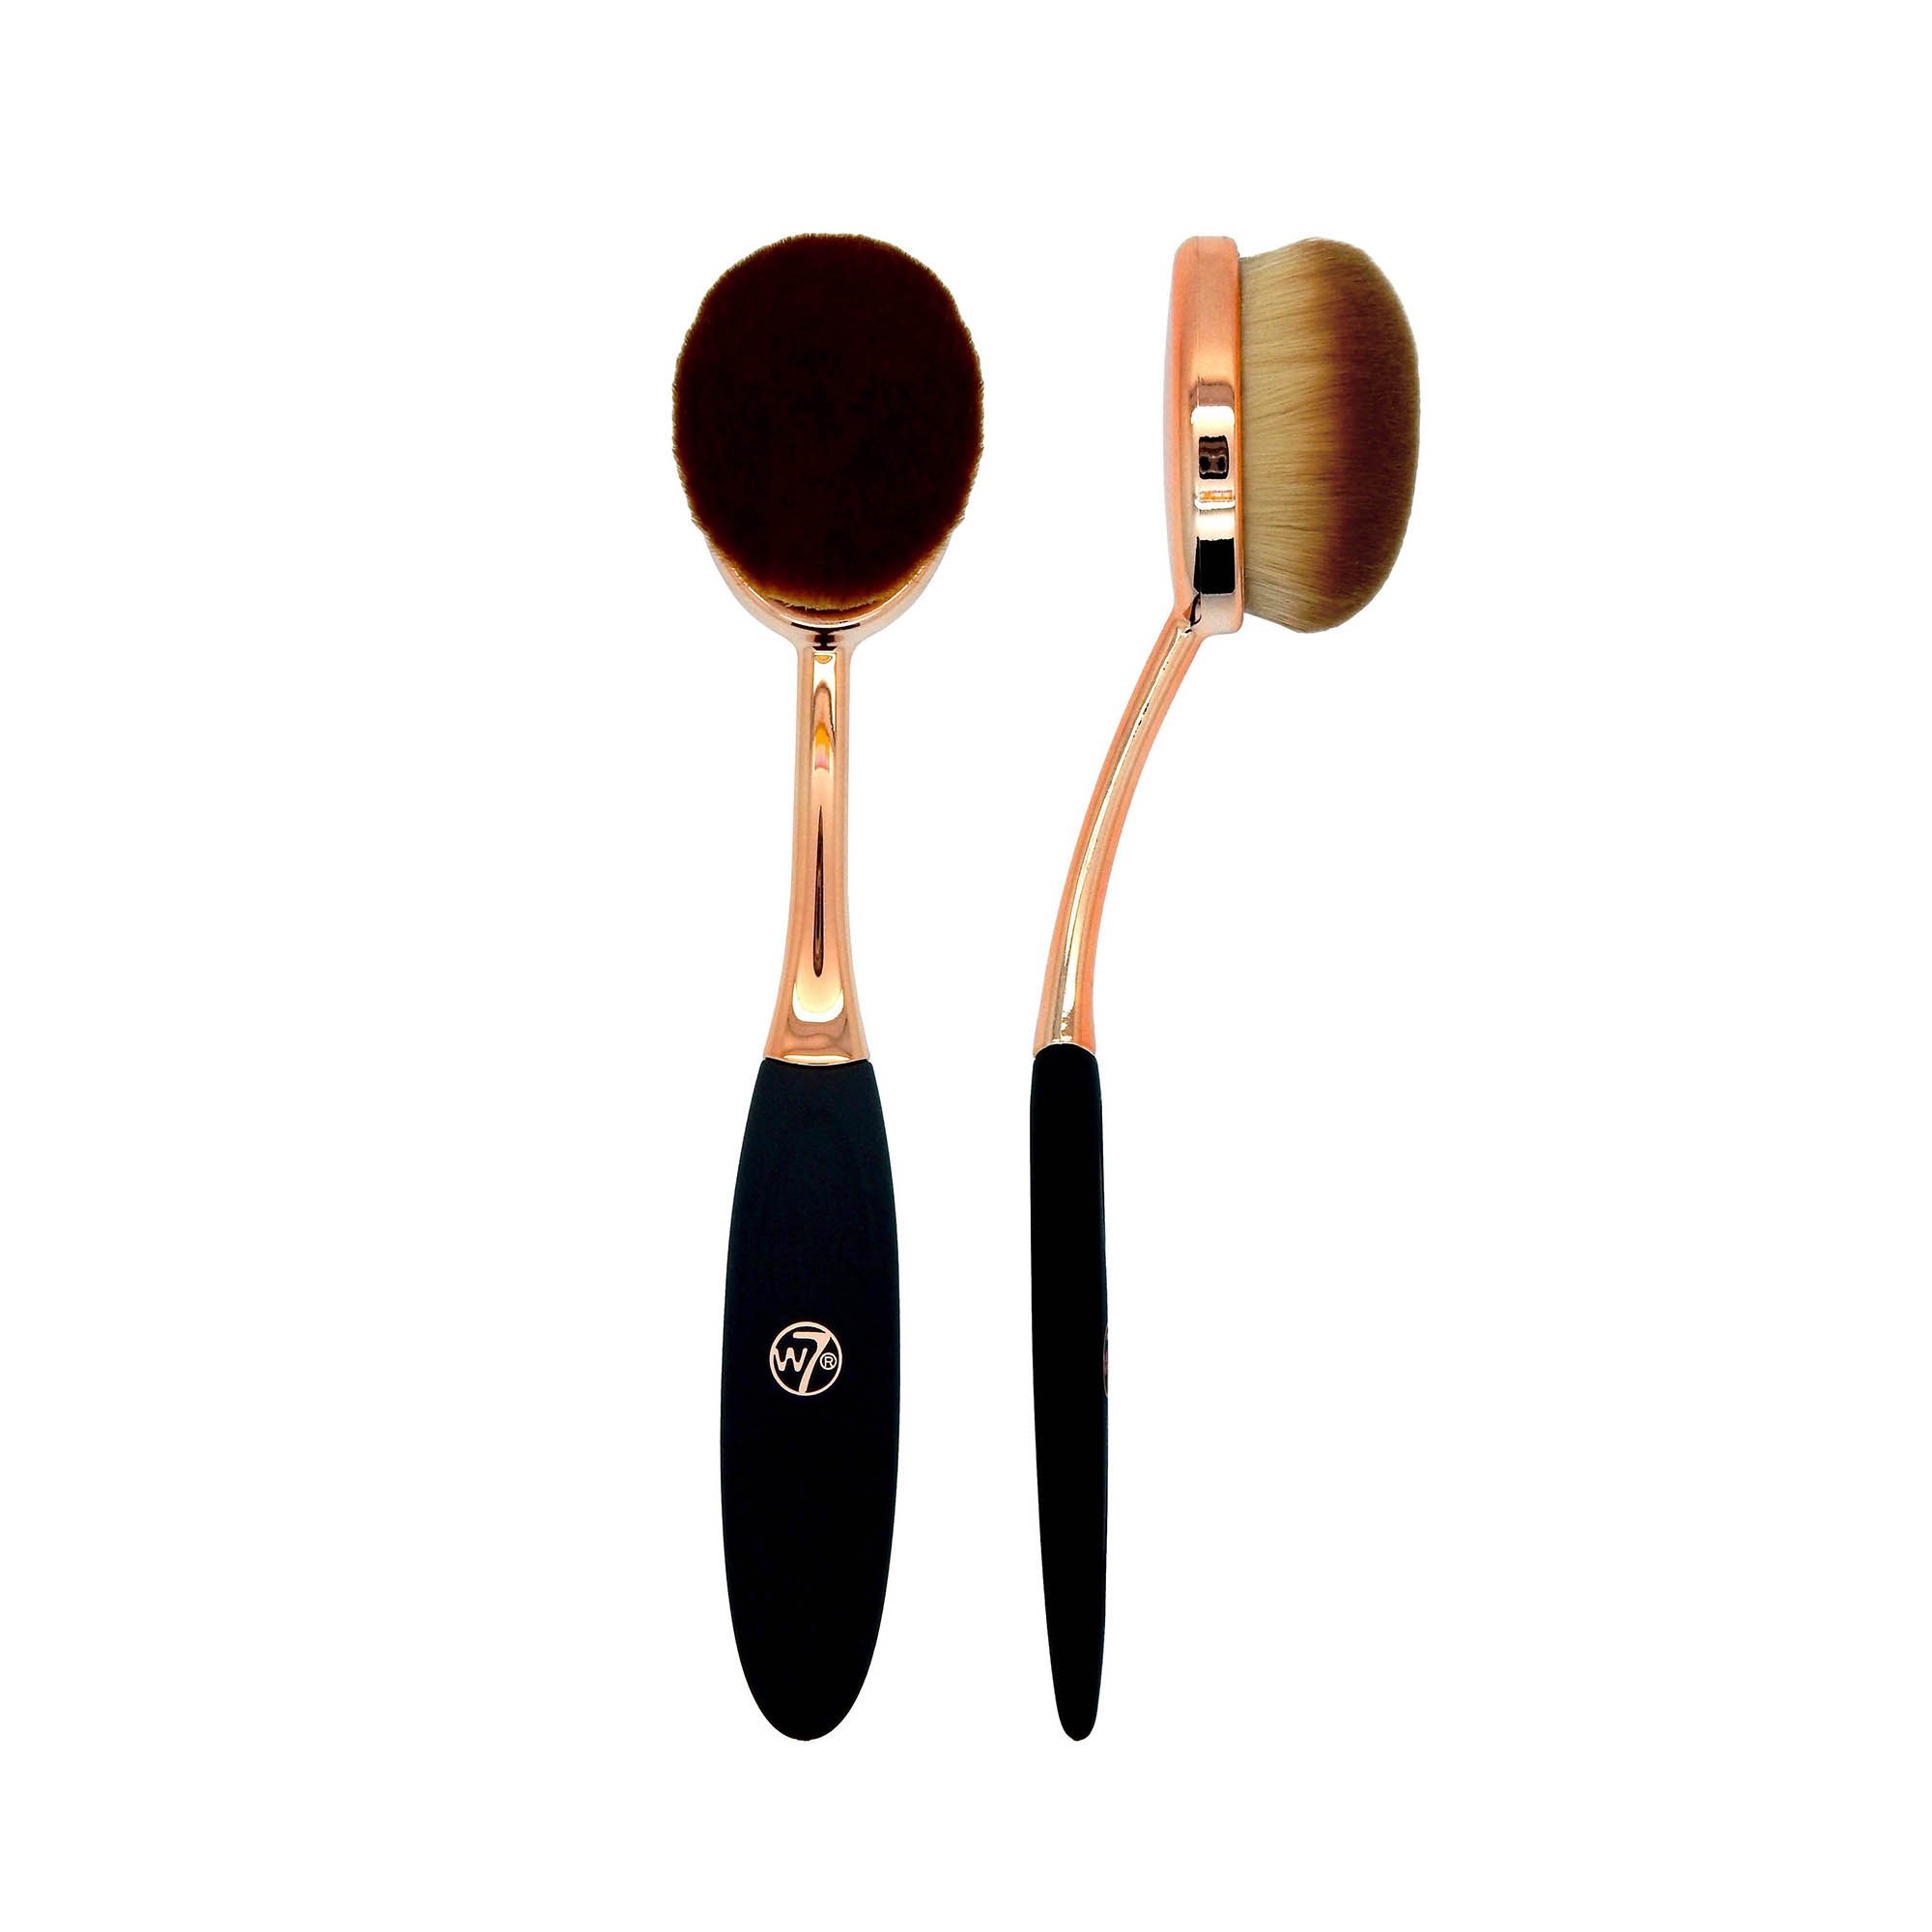 Ovales 10-Teiliges Pinsel-Set - Professional Soft Brush Collection